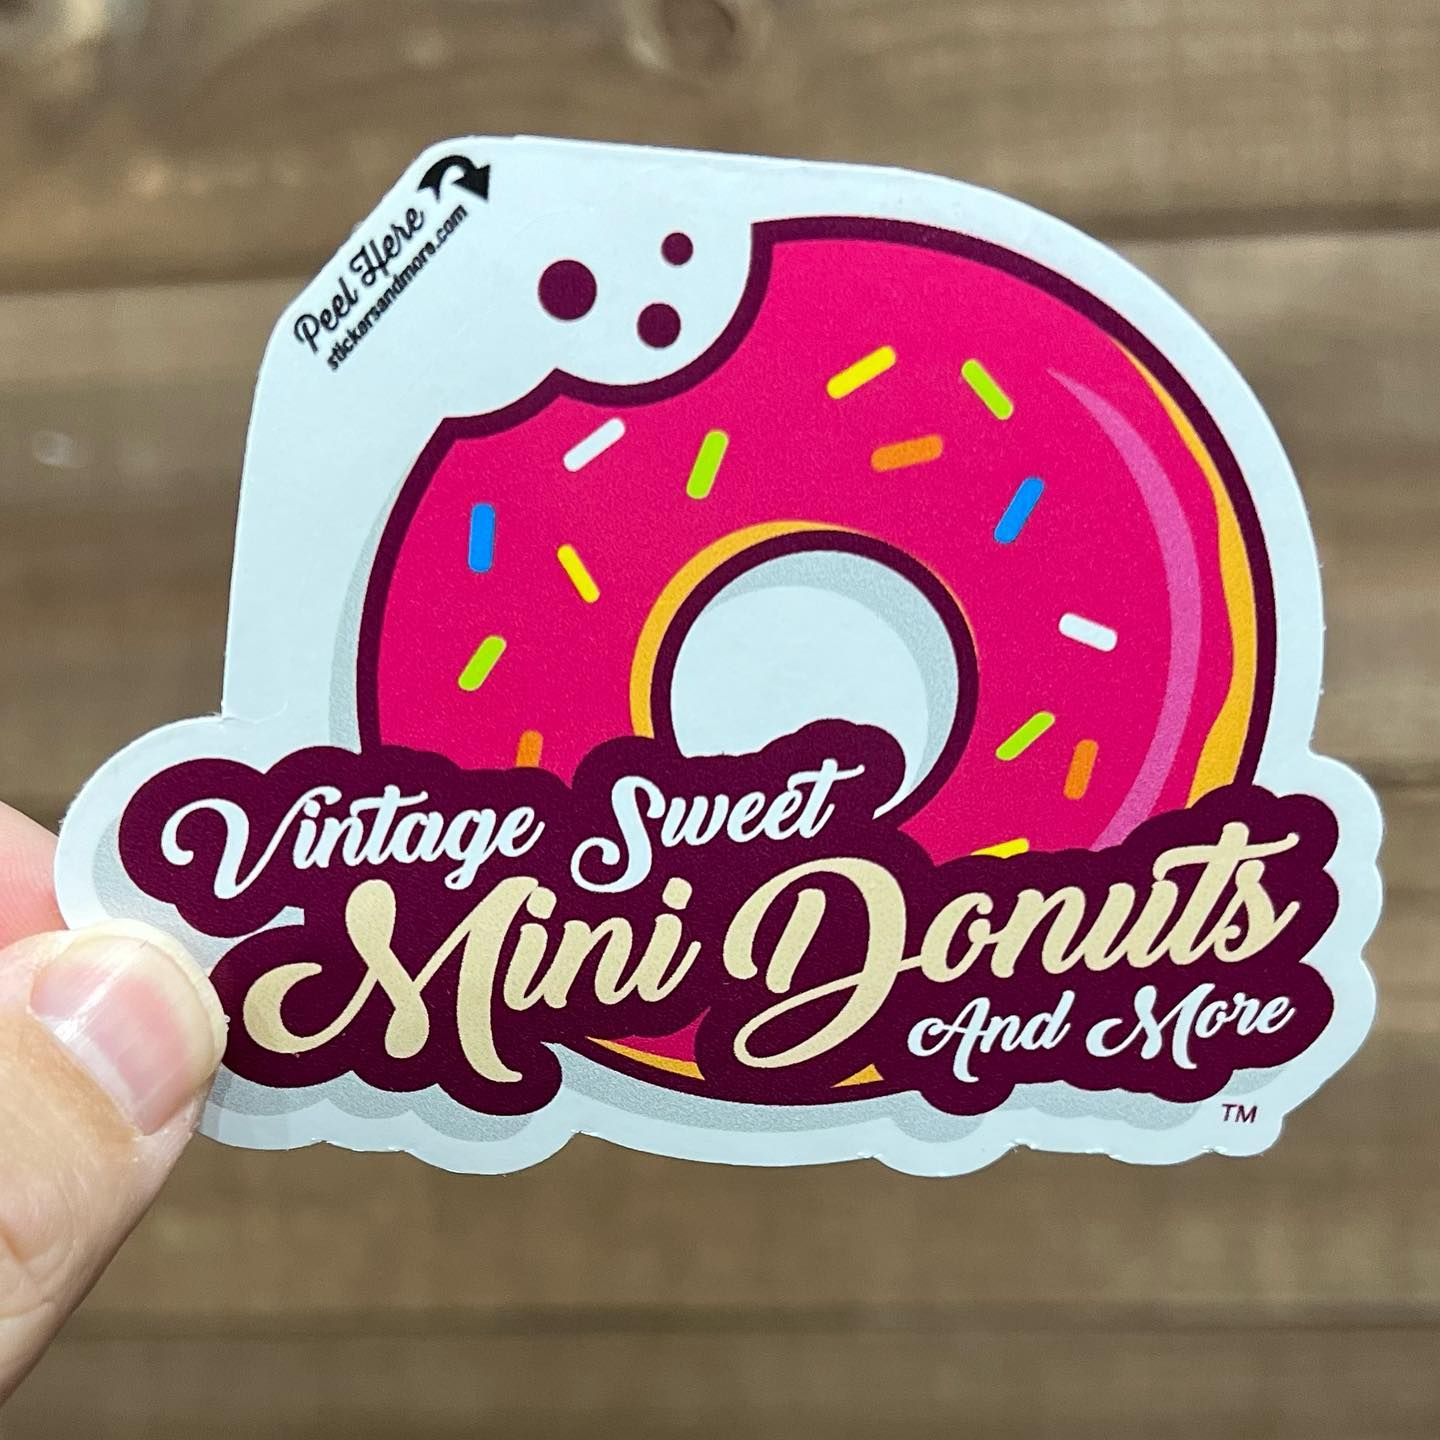 #stickeroftheday vintagesweet_donuts #vintagedonuts #donuts #sweettreats #vintagesweetdonuts #stickers #donuts🍩